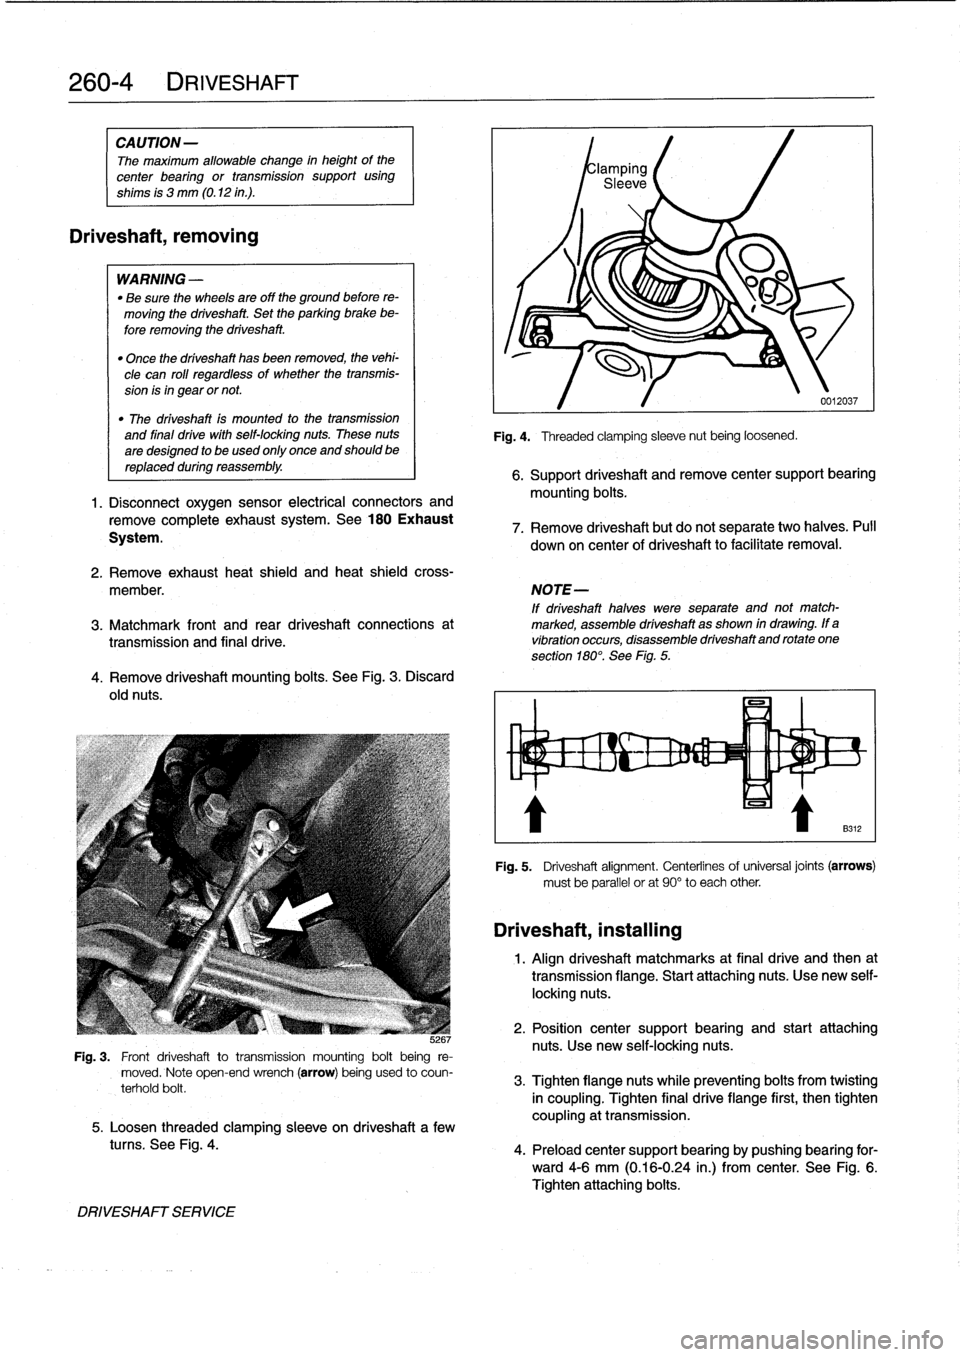 BMW M3 1996 E36 Workshop Manual 
260-
4
DRIVESHAFT

CAUTION
-

The
maximum
allowable
change
in
height
of
the

center
bearing
or
transmission
support
using

shims
is
3
mm
(0
.12
in
.)
.

Driveshaft,
removing

WARNING
-

"
Be
sure
the